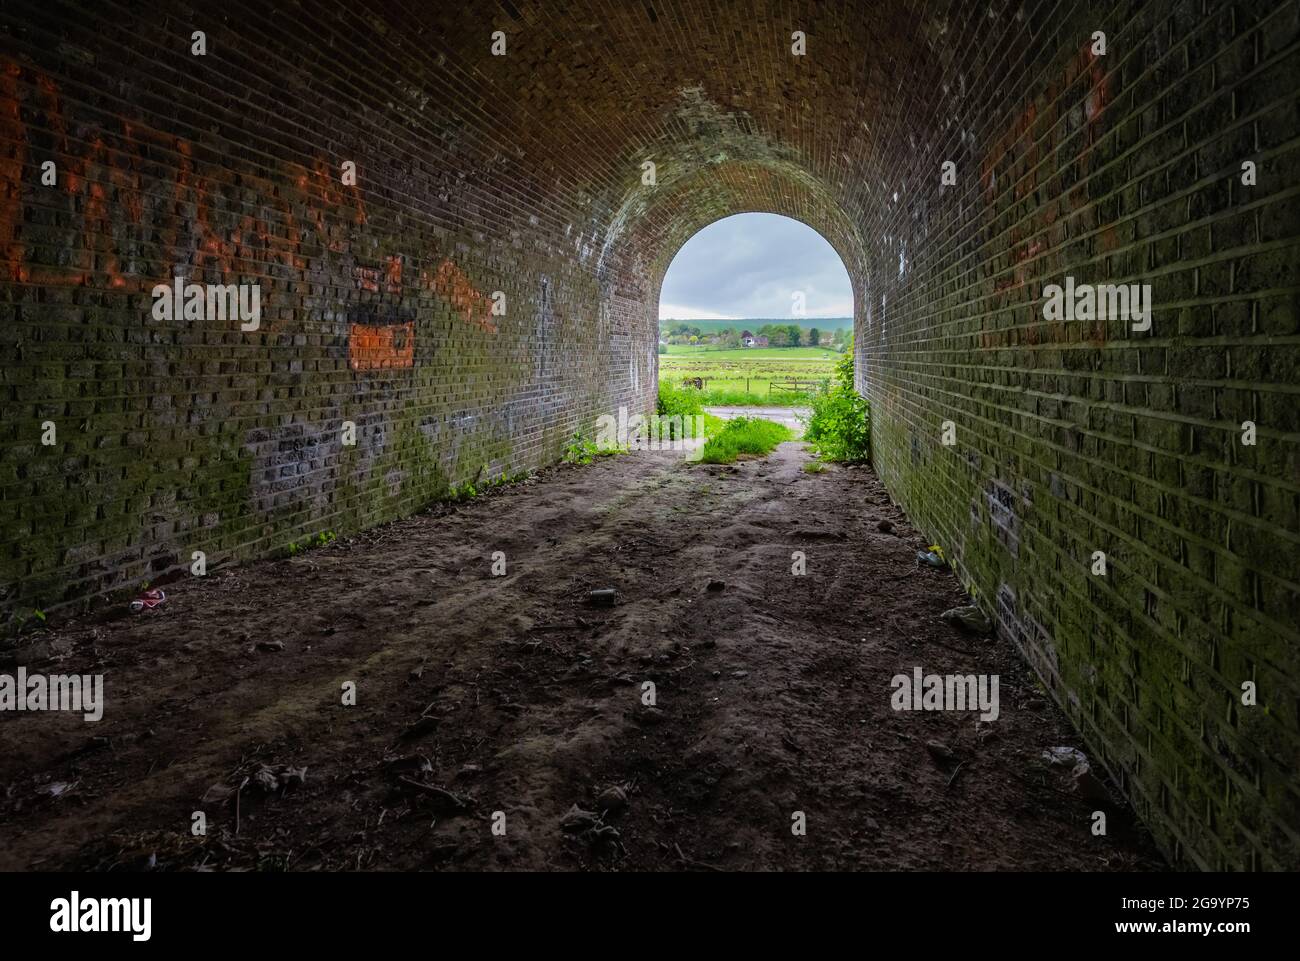 Inside a brick underline railway bridge, seemingly a tunnel, looking towards the exit using a wide angle lens in Amberley, West Sussex, England, UK. Stock Photo